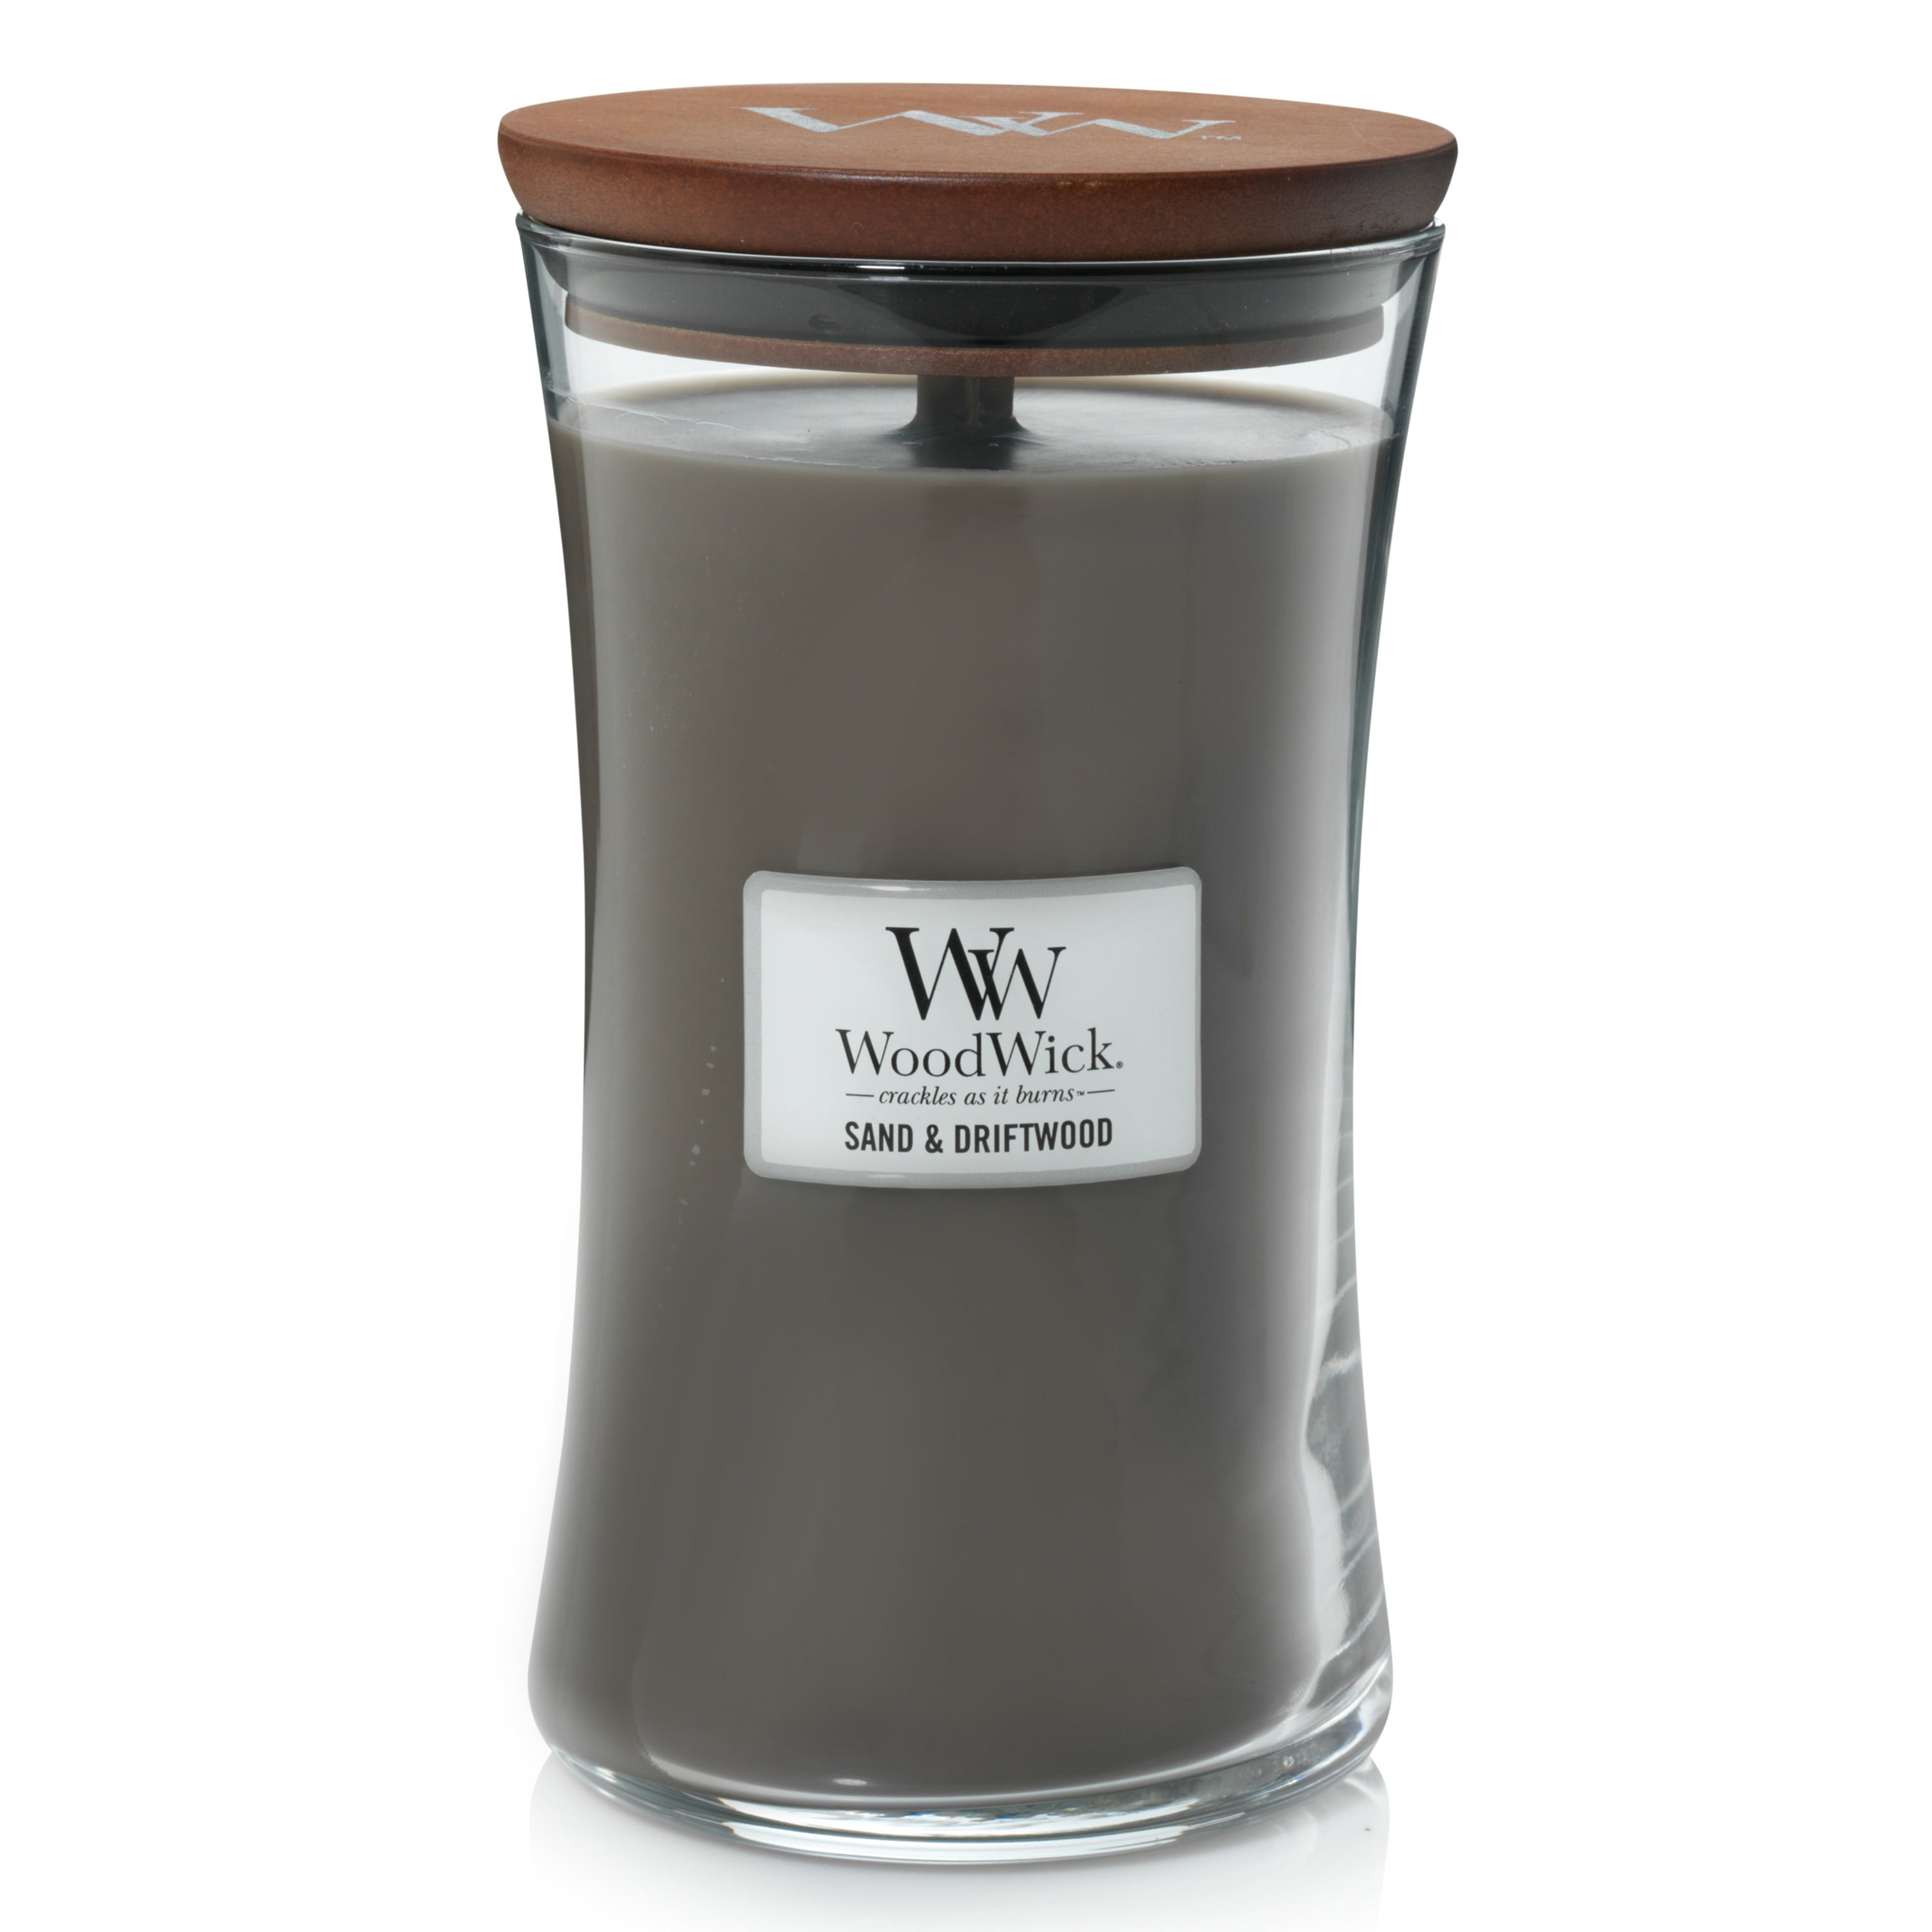 WoodWick Sand & Driftwood Large Hourglass Candle